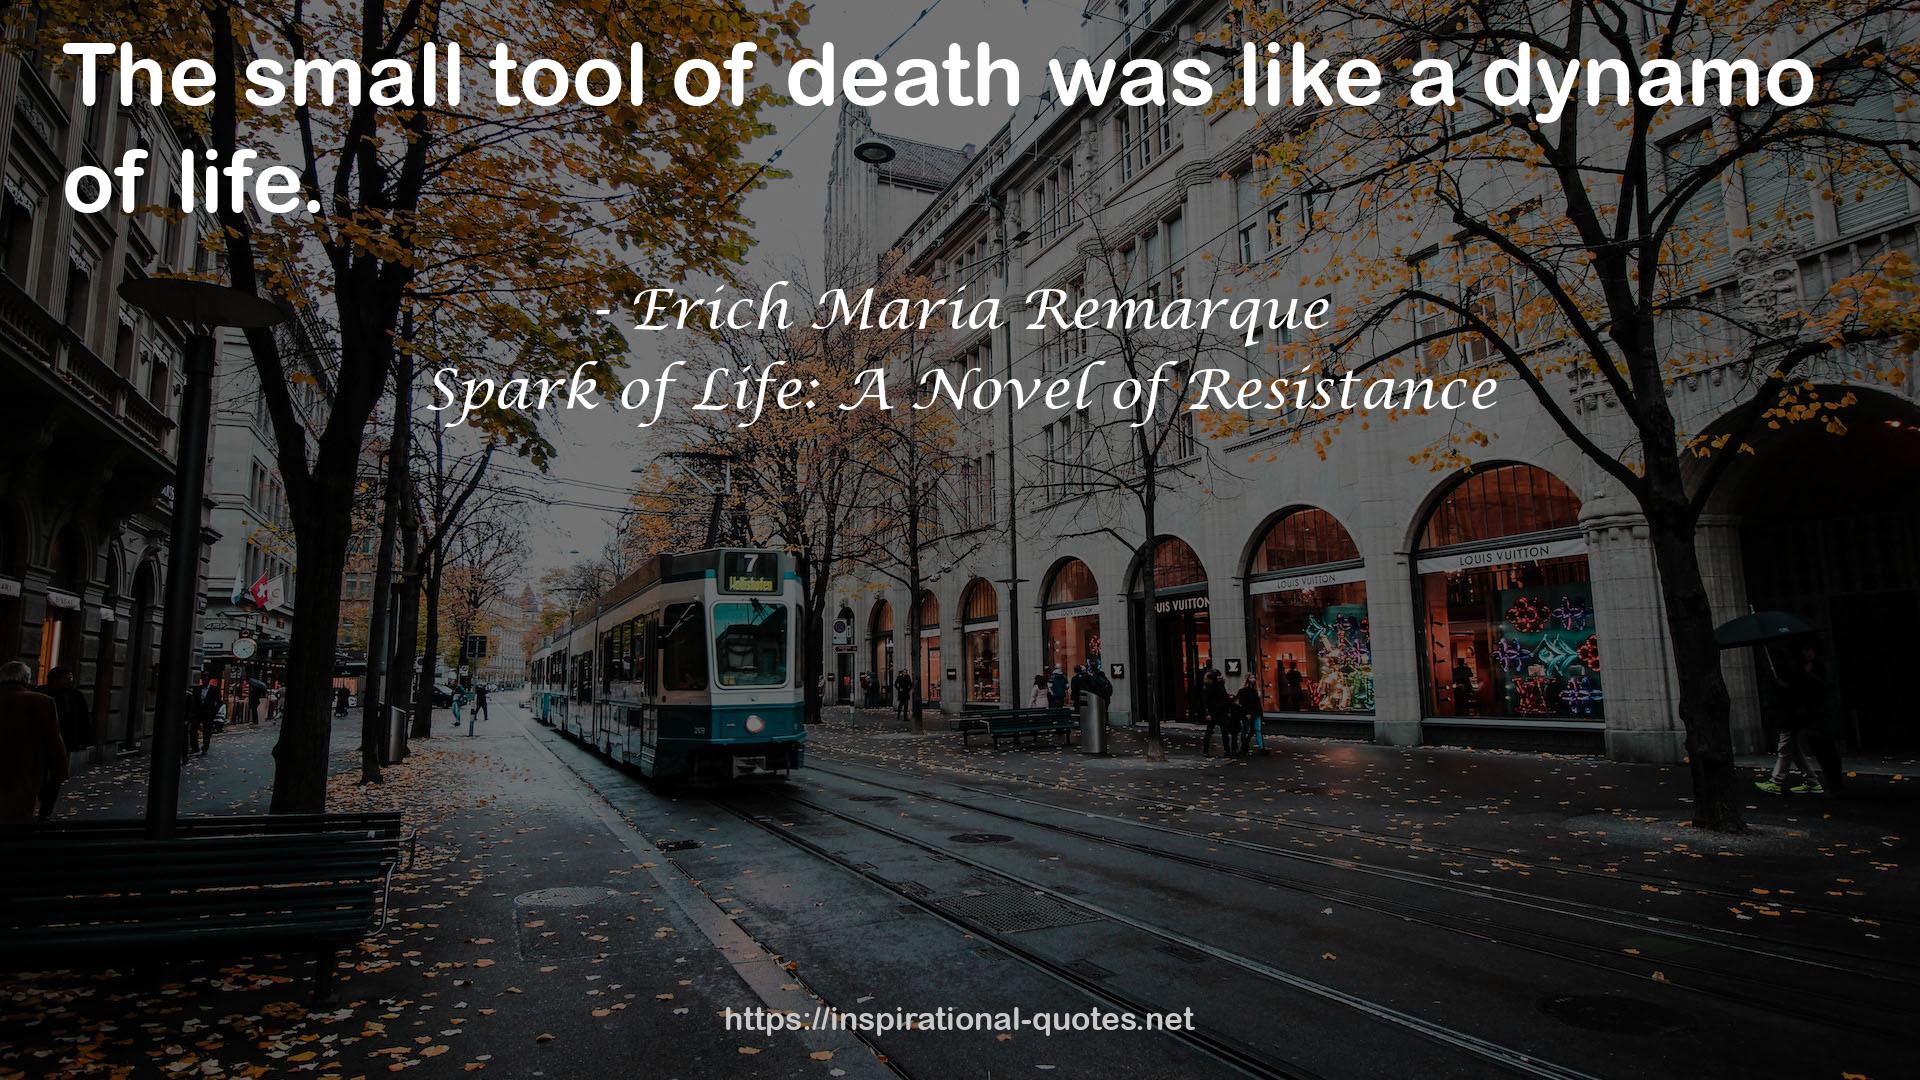 Spark of Life: A Novel of Resistance QUOTES